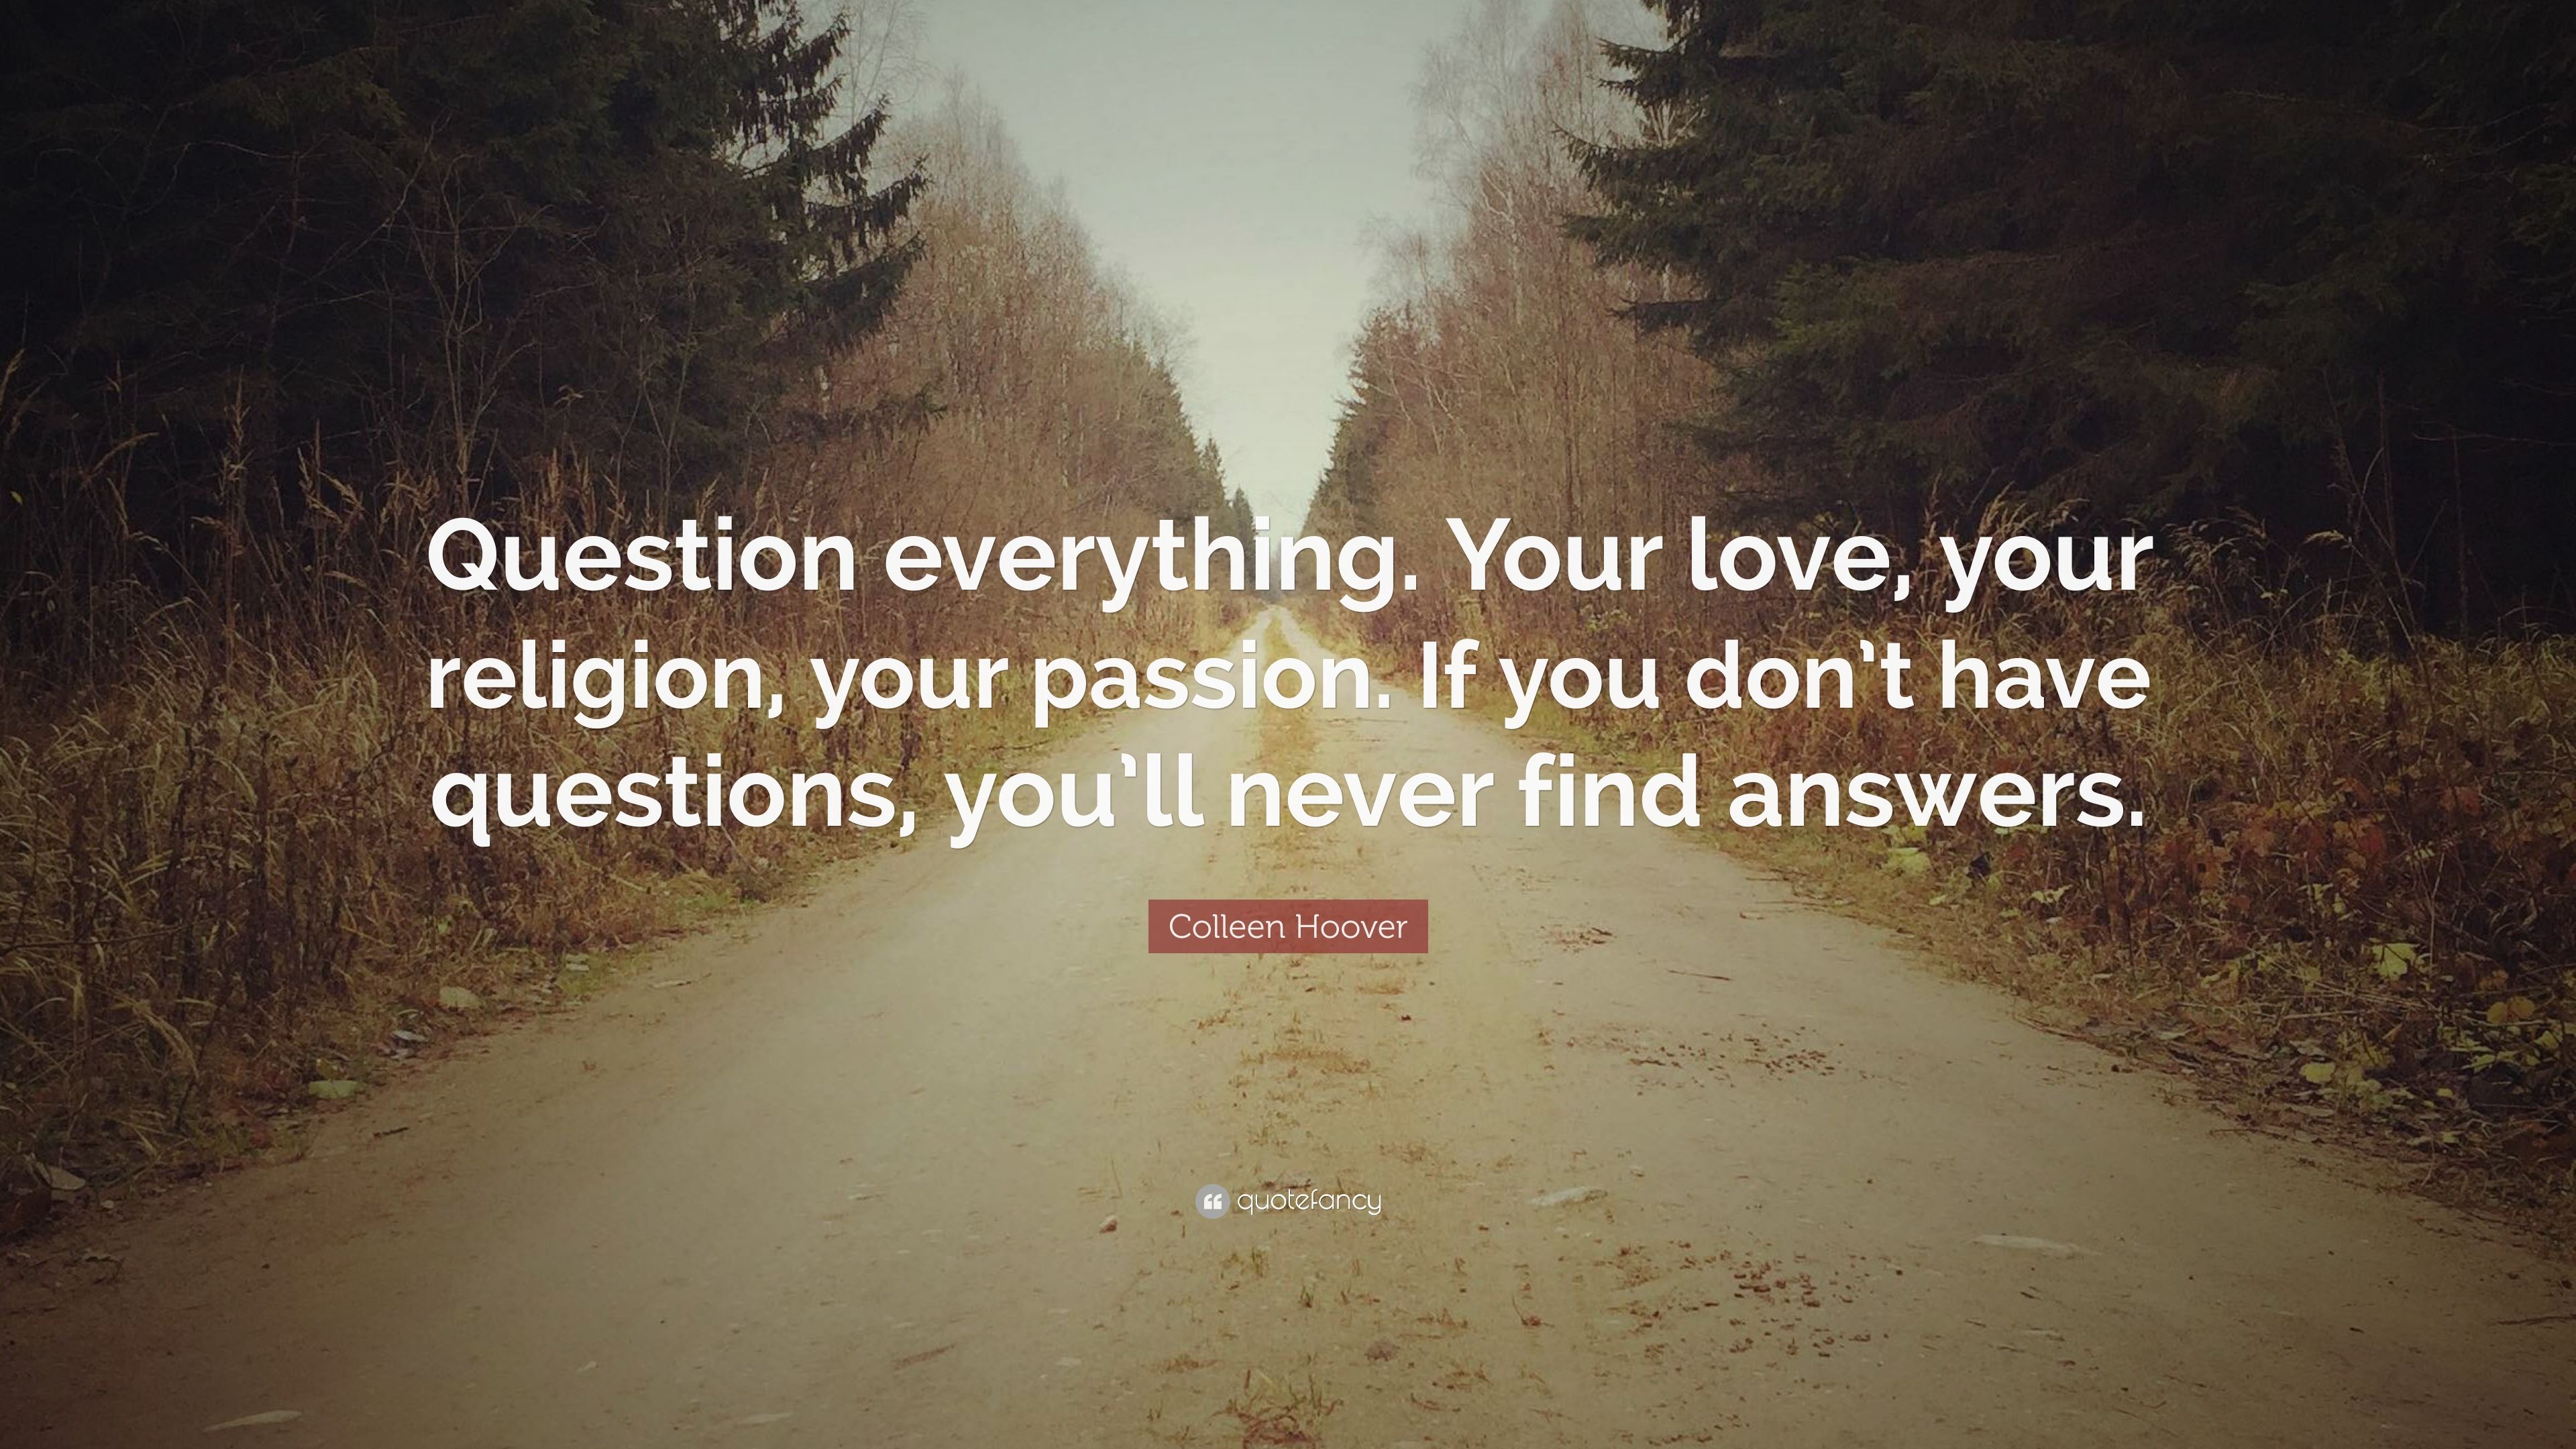 Colleen Hoover Quote: “Question everything. Your love, your religion, your passion. If you don't have questions, you'll never find answers.” (12 wallpaper)